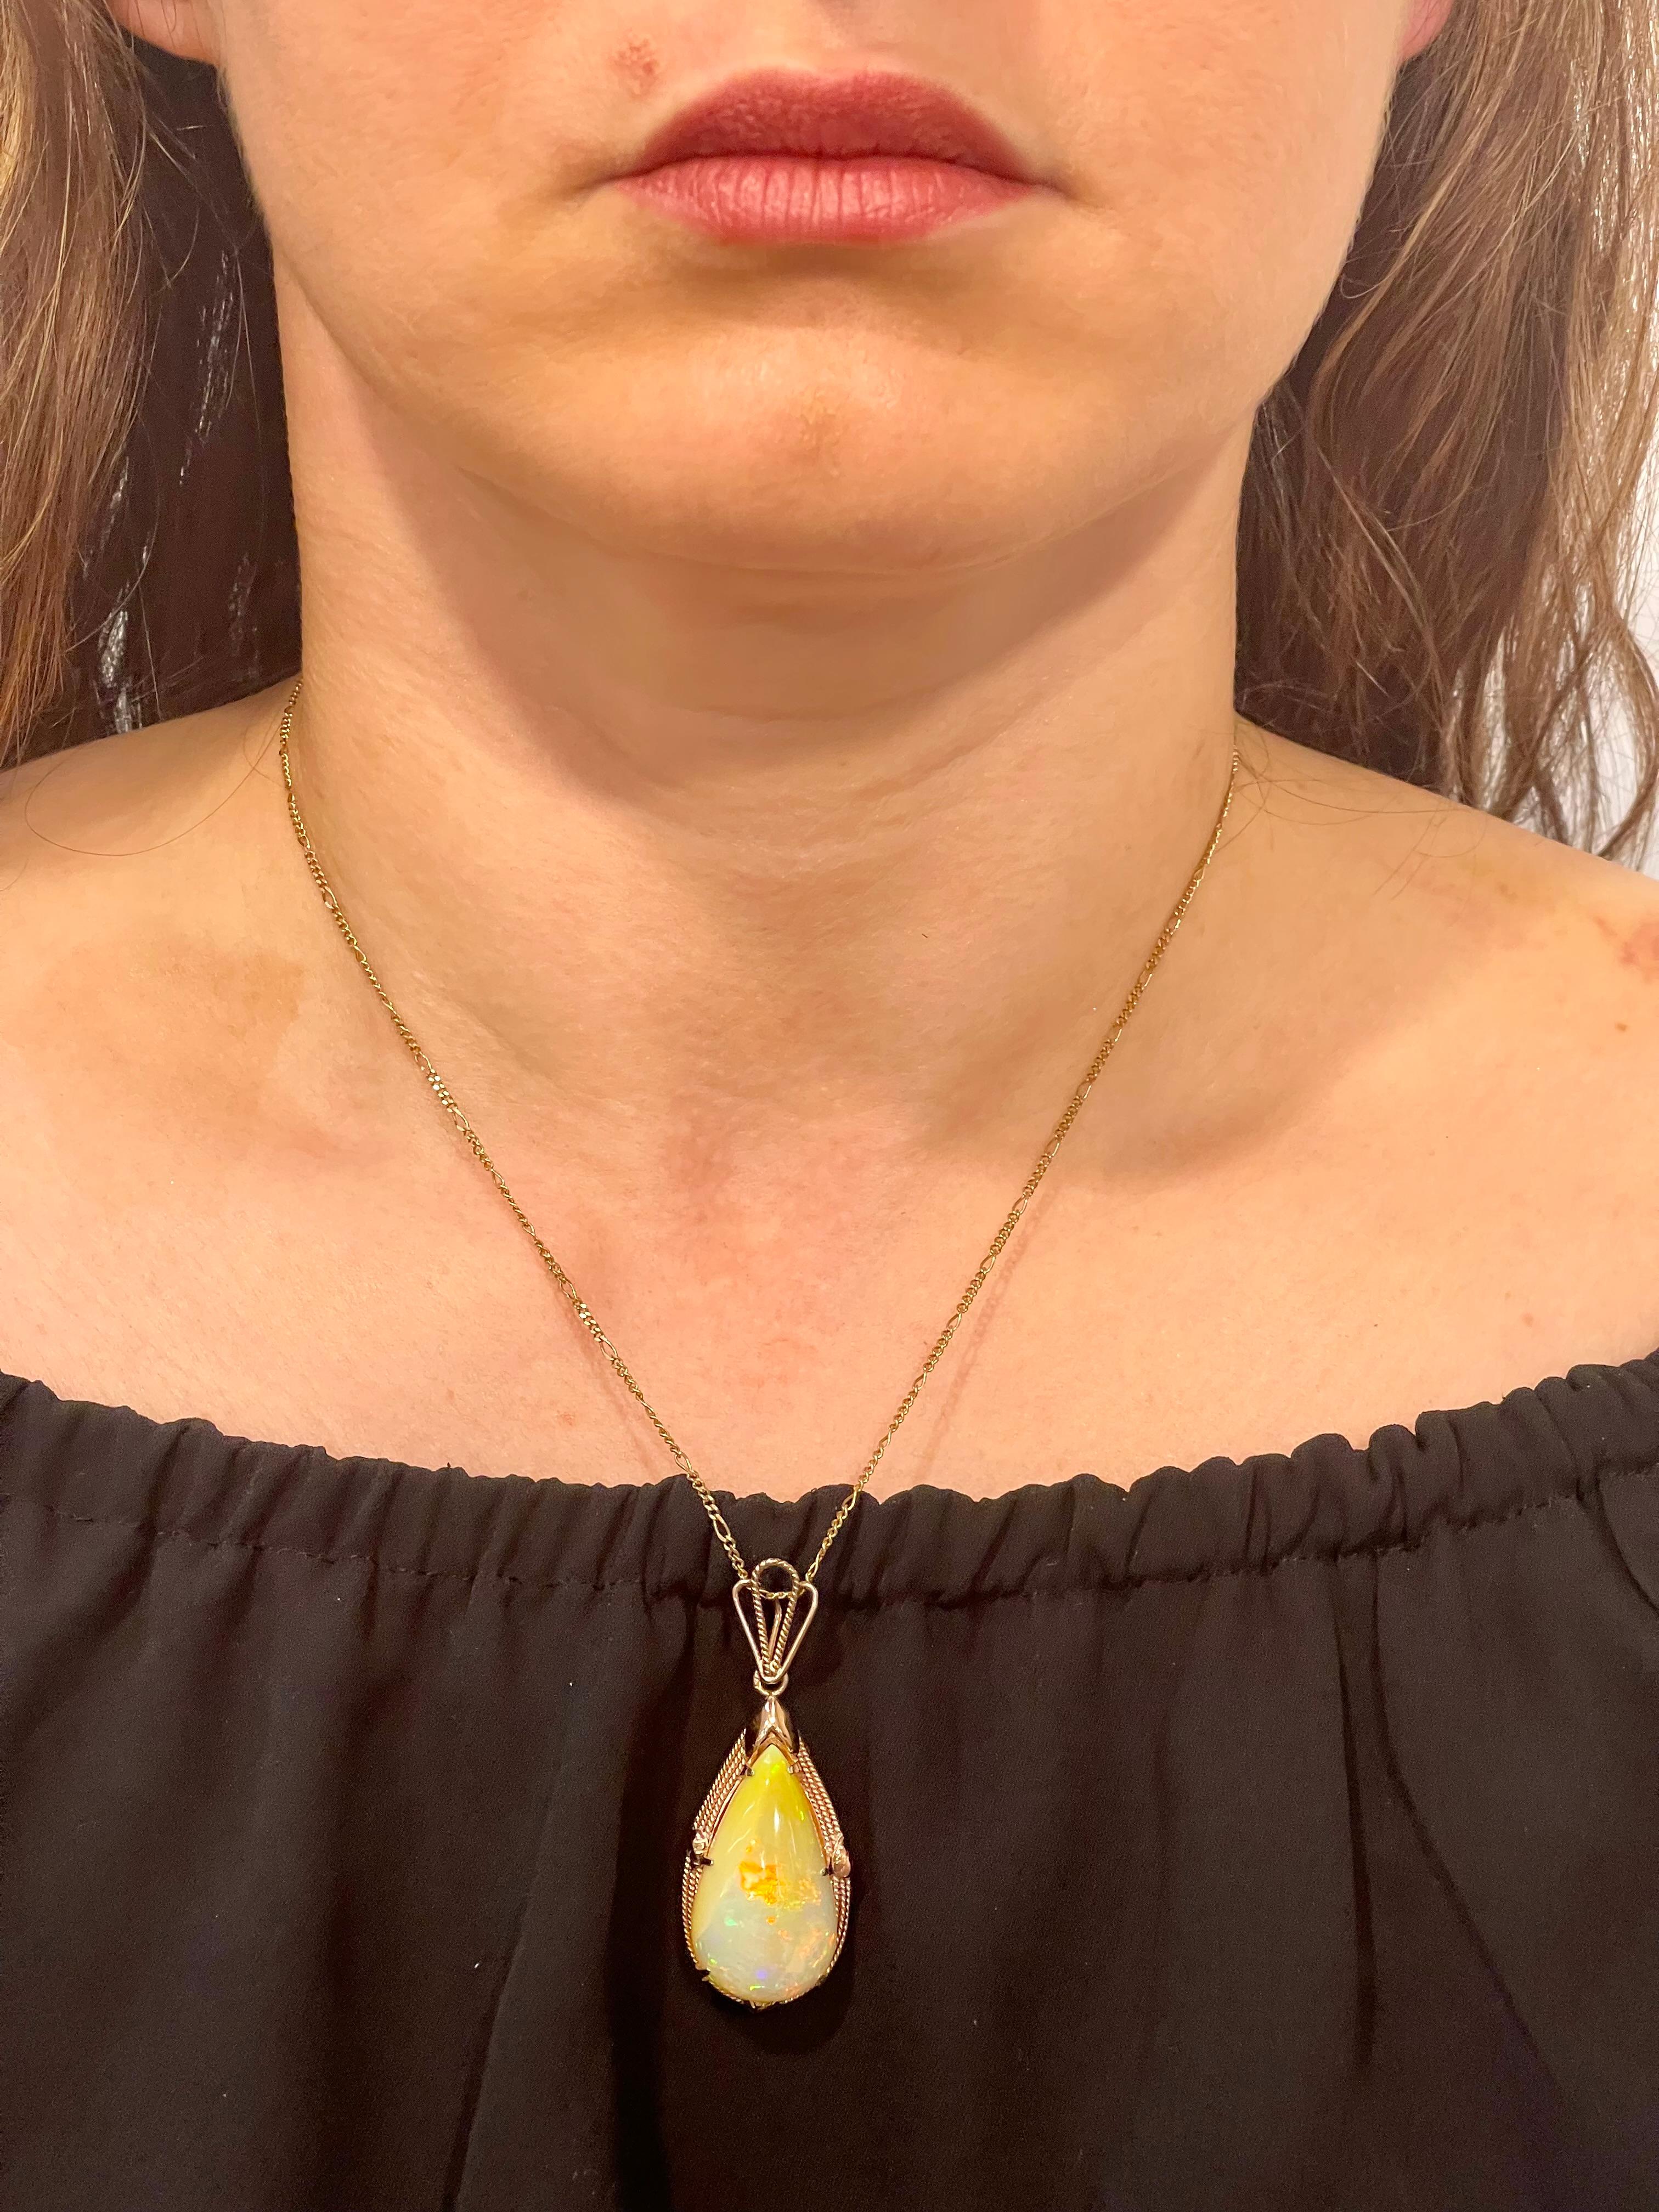 20 Carat Pear Ethiopian Opal  Pendant / Necklace 18 Karat Yellow Gold Estate
This spectacular Pendant Necklace  consisting of a single Pear  Shape Ethiopian  Opal Approximately 20 Carat.  
very clean Stone no inclusion   , full of luster and shine 